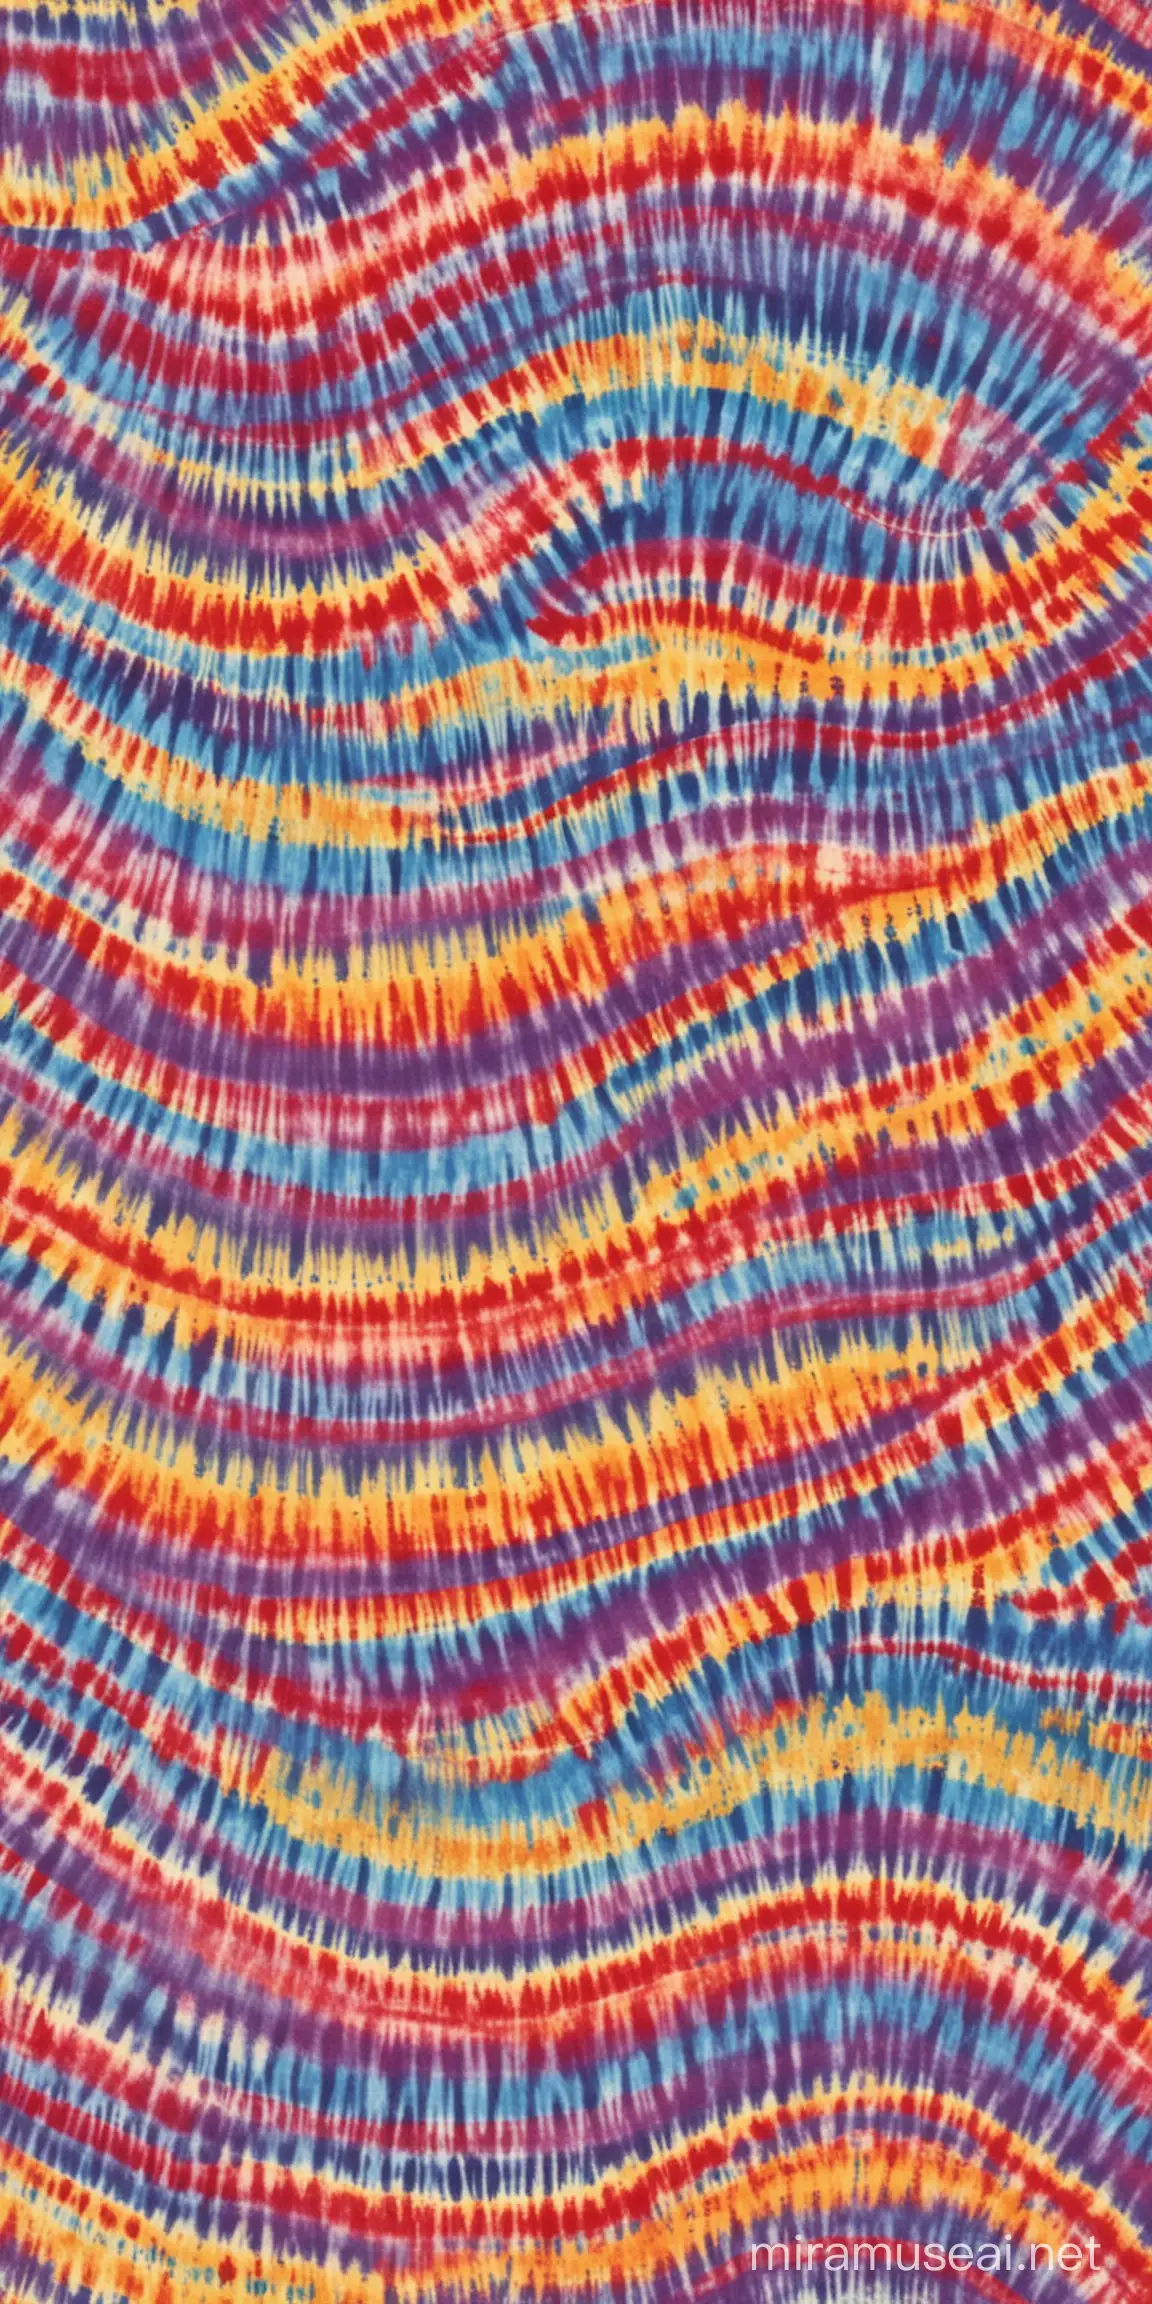 simple seamless swirled pattern of colorful retro tie dye purple red yellow blue soft ar 293:151